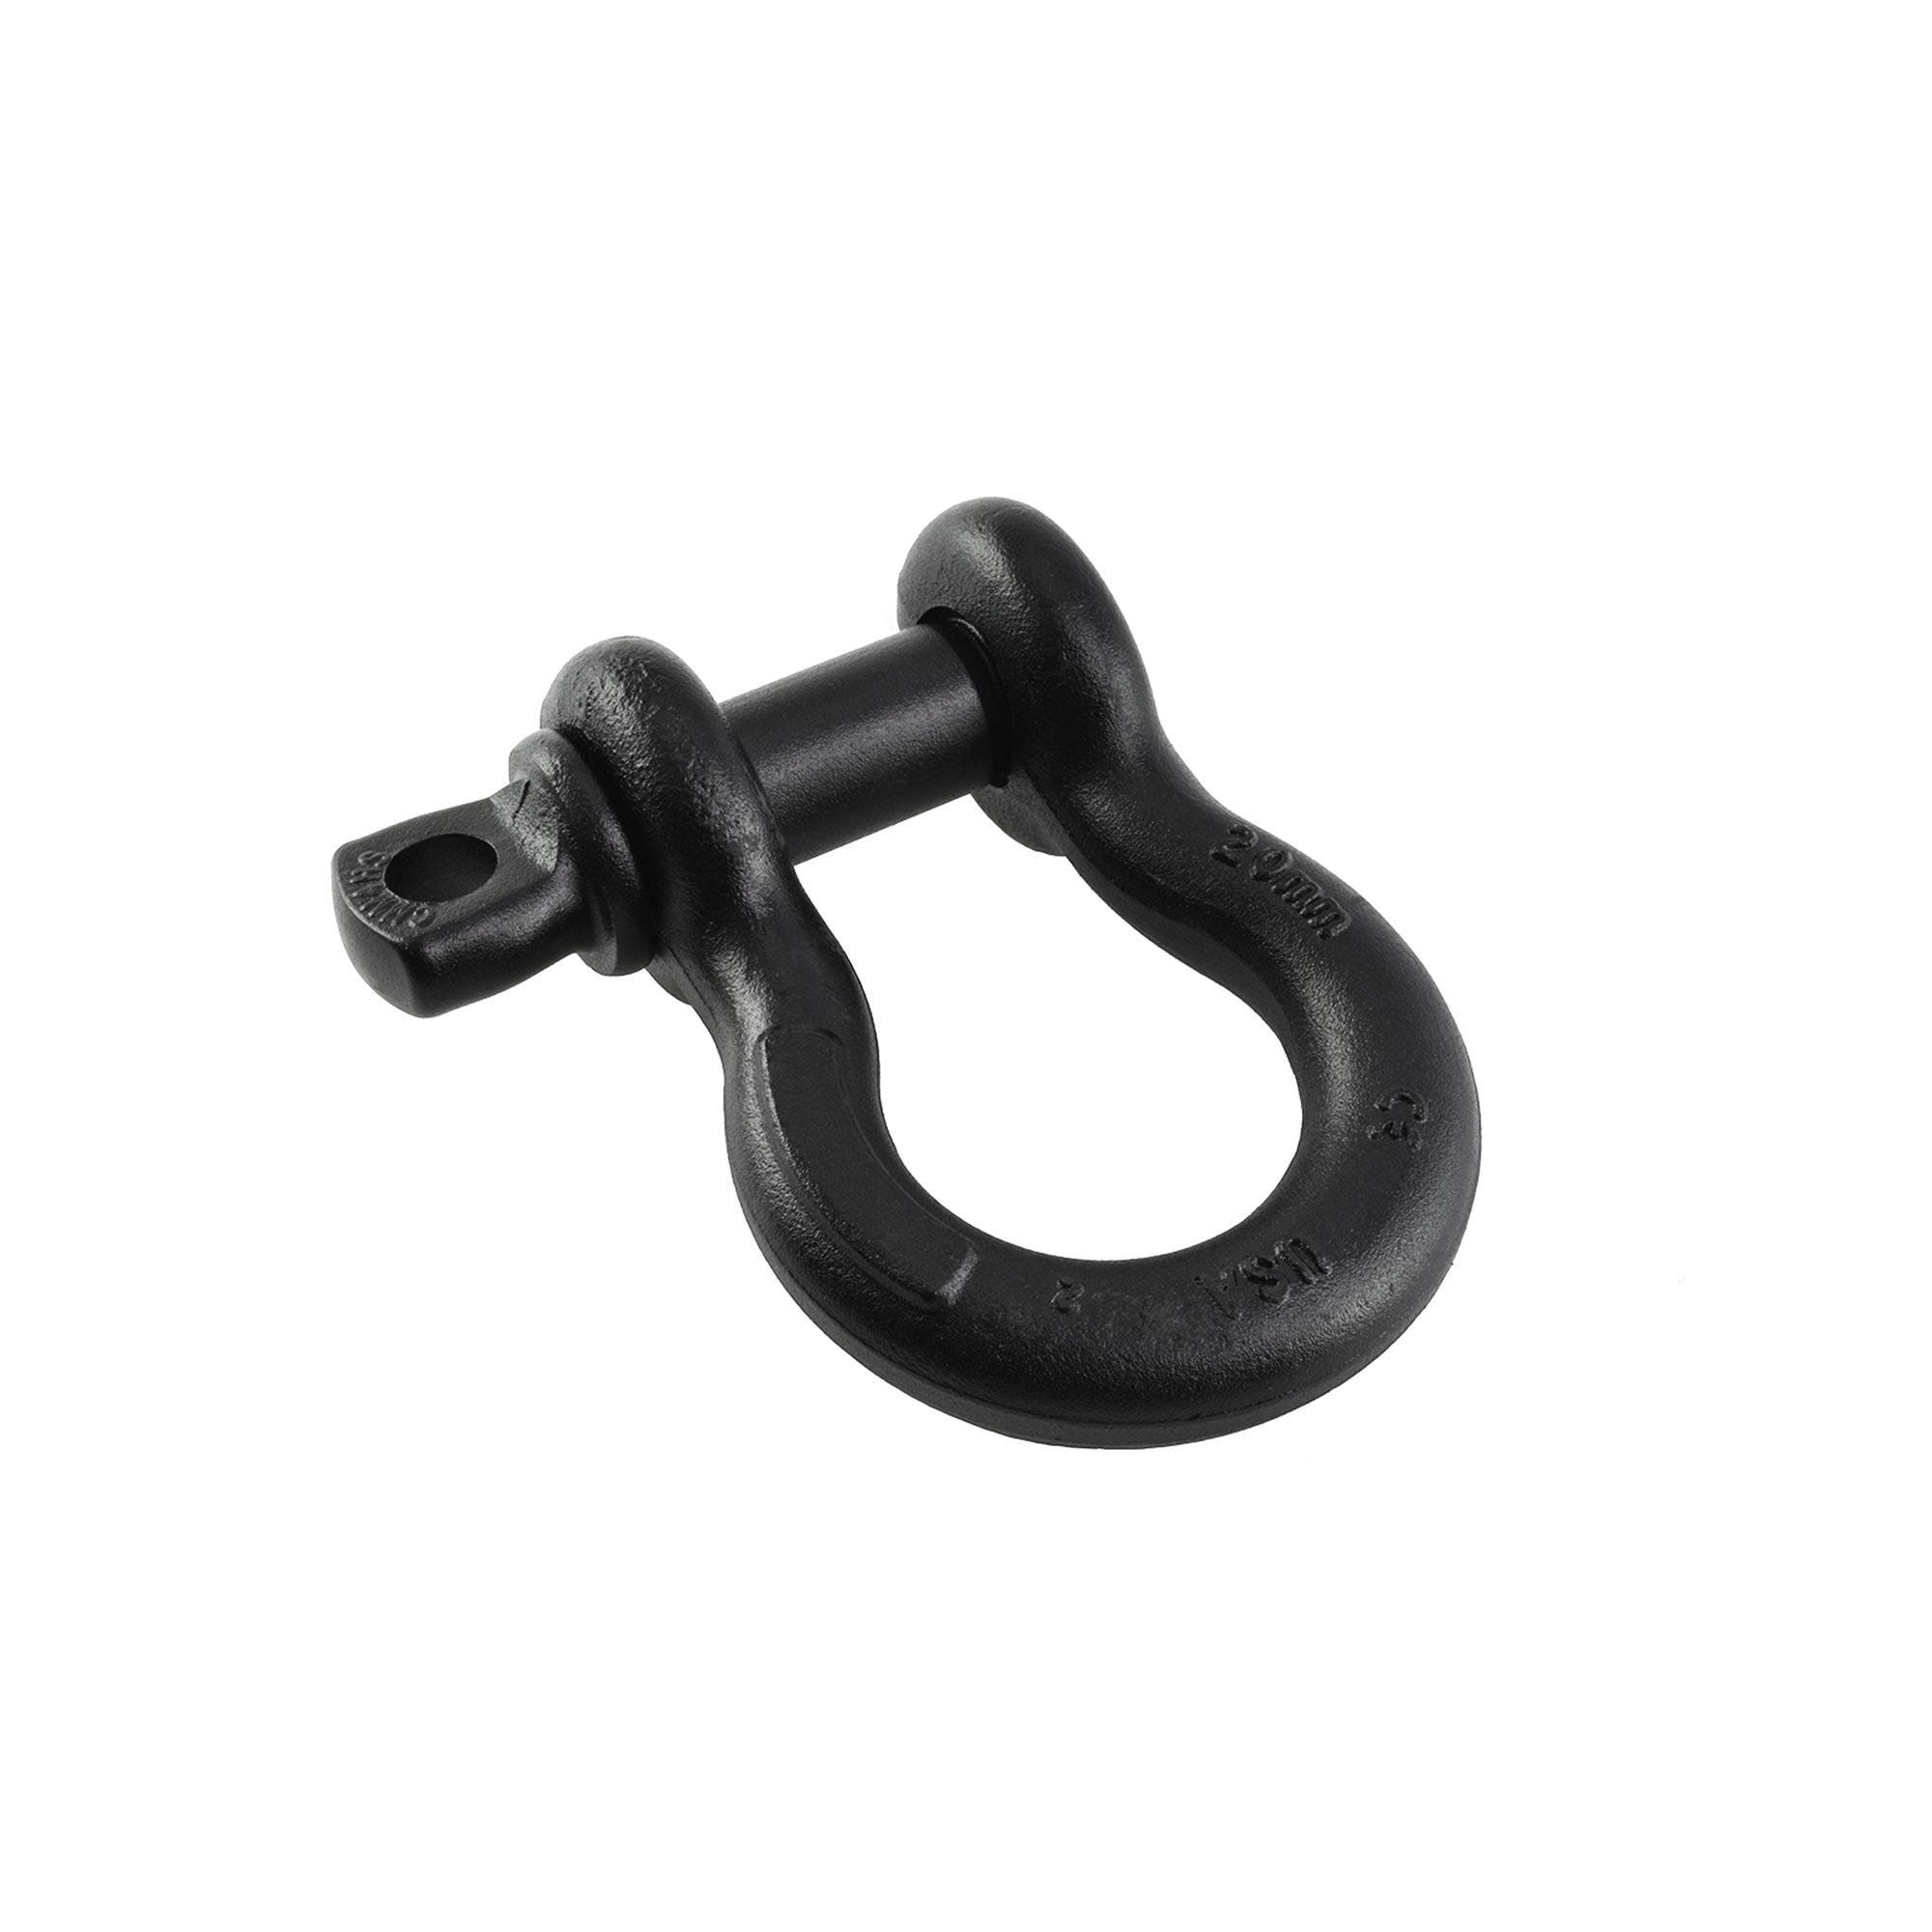 D-Ring 3/4" 6.5 Ton, Domestic - For Use With 2" Shackle Block